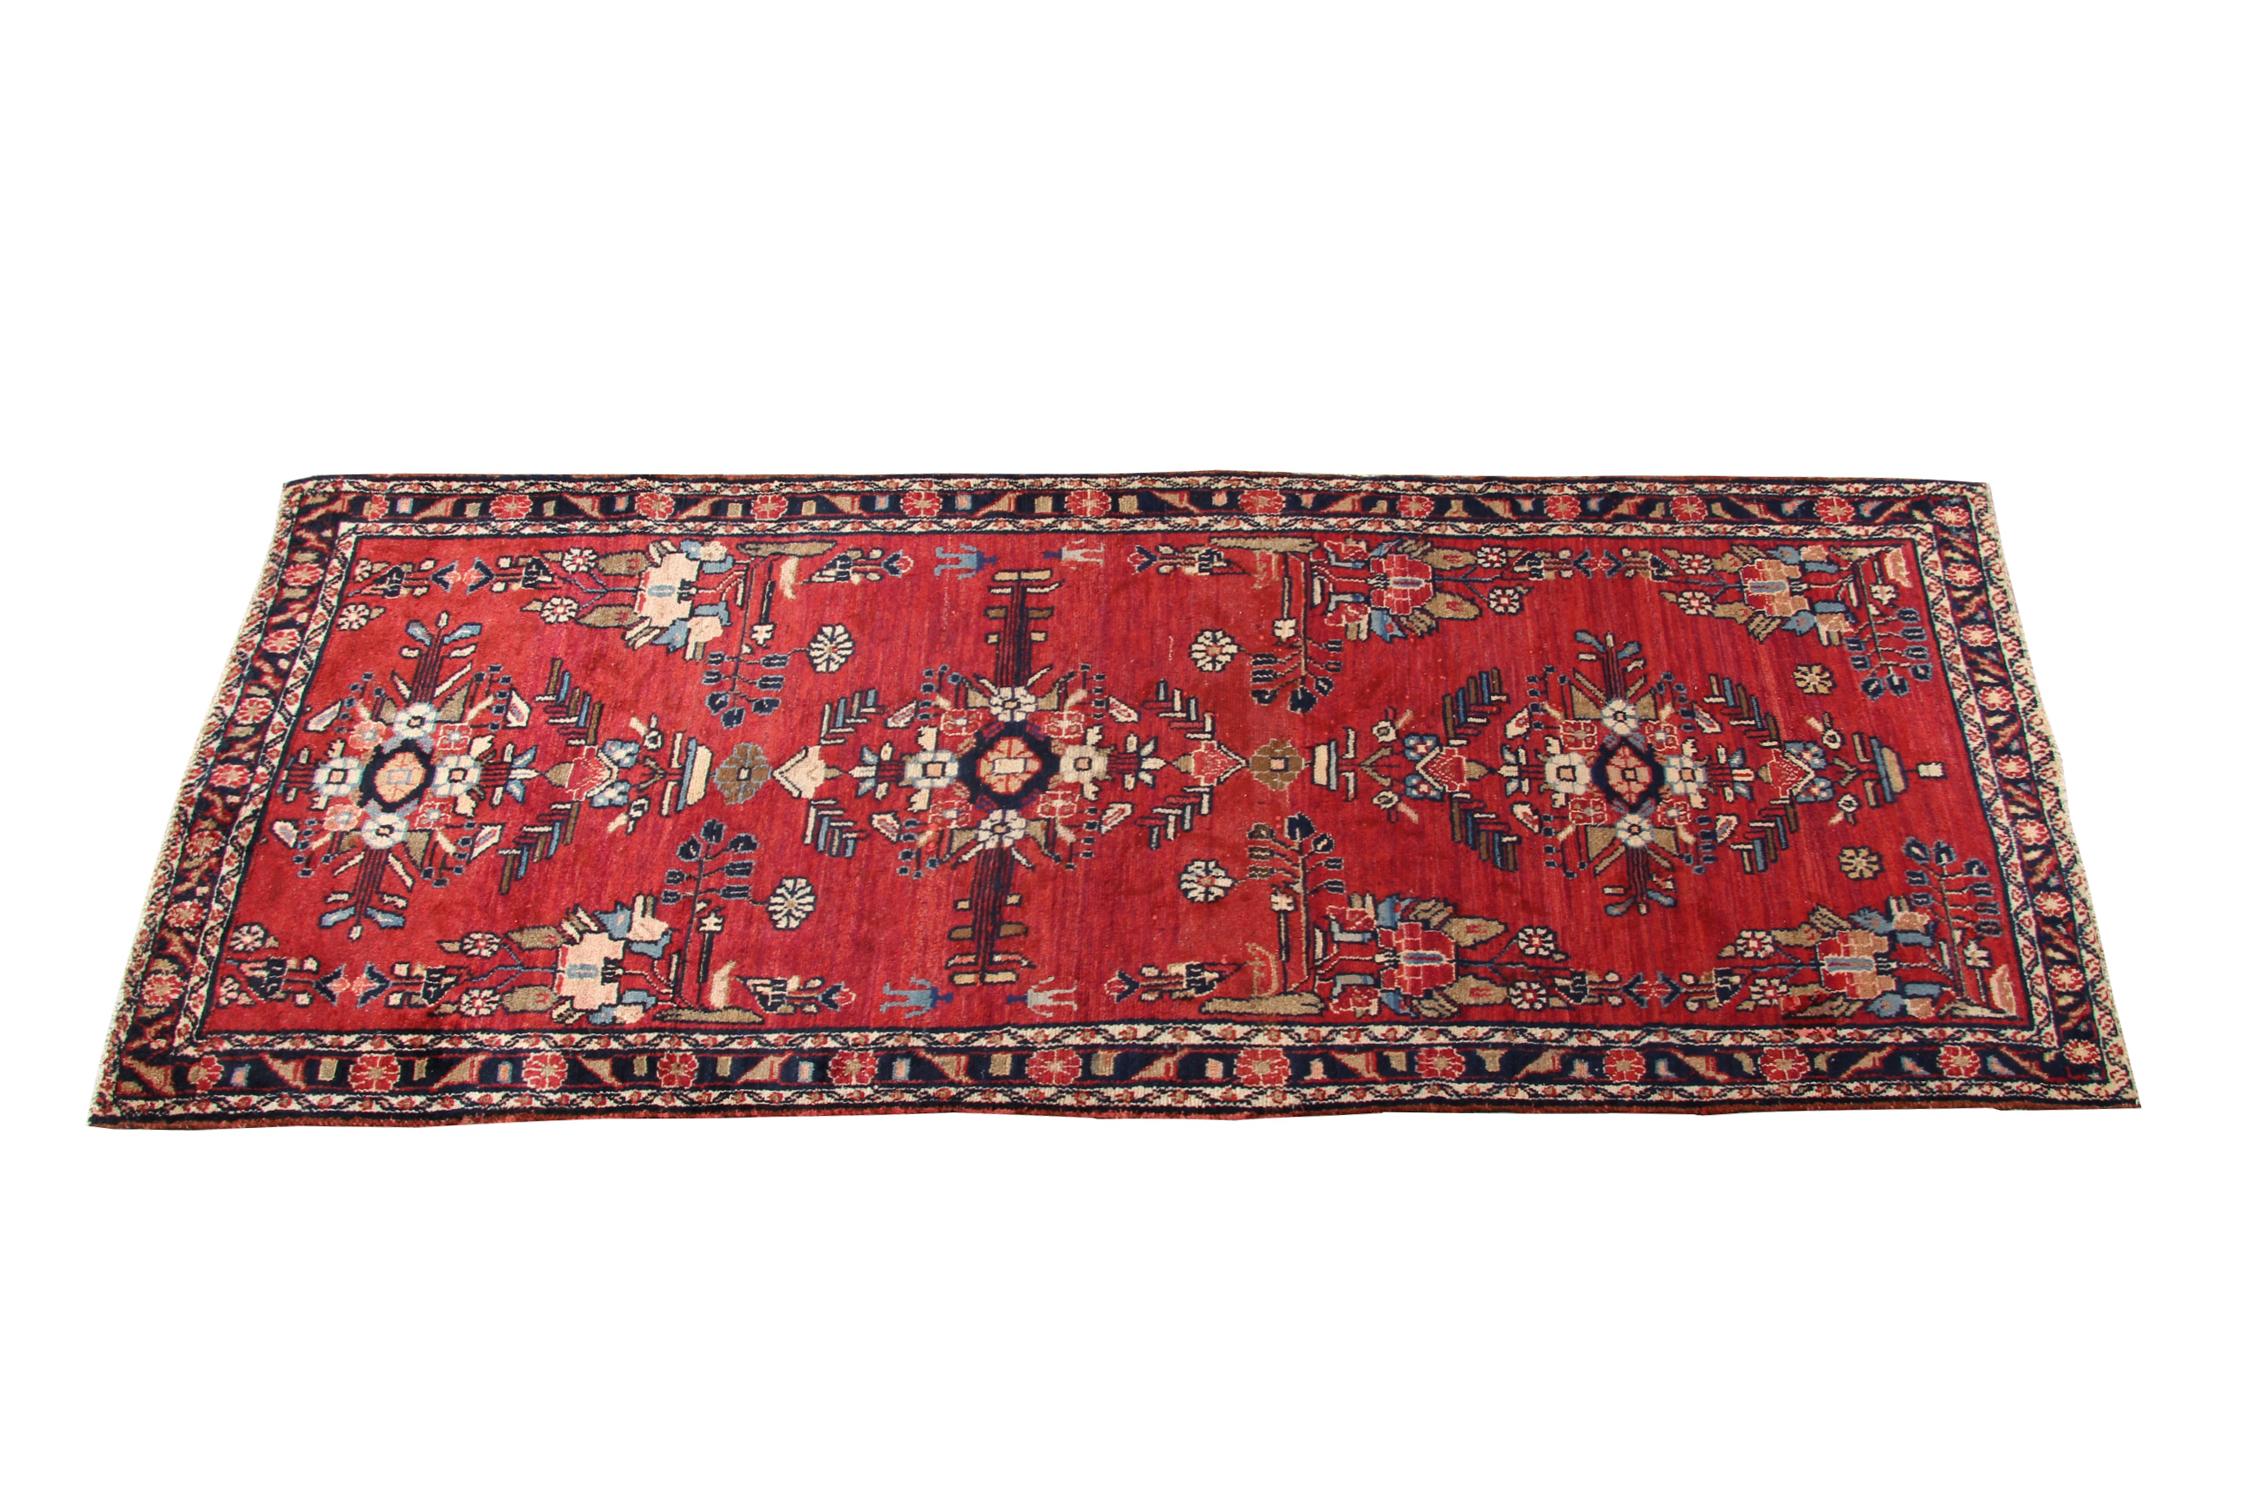 Both the colour, design and construction of this fine wool rug make it the perfect accent piece. The central design features a rich red background with an intricate tribal repeat design woven in brown, black and deep red accent colours. This is then